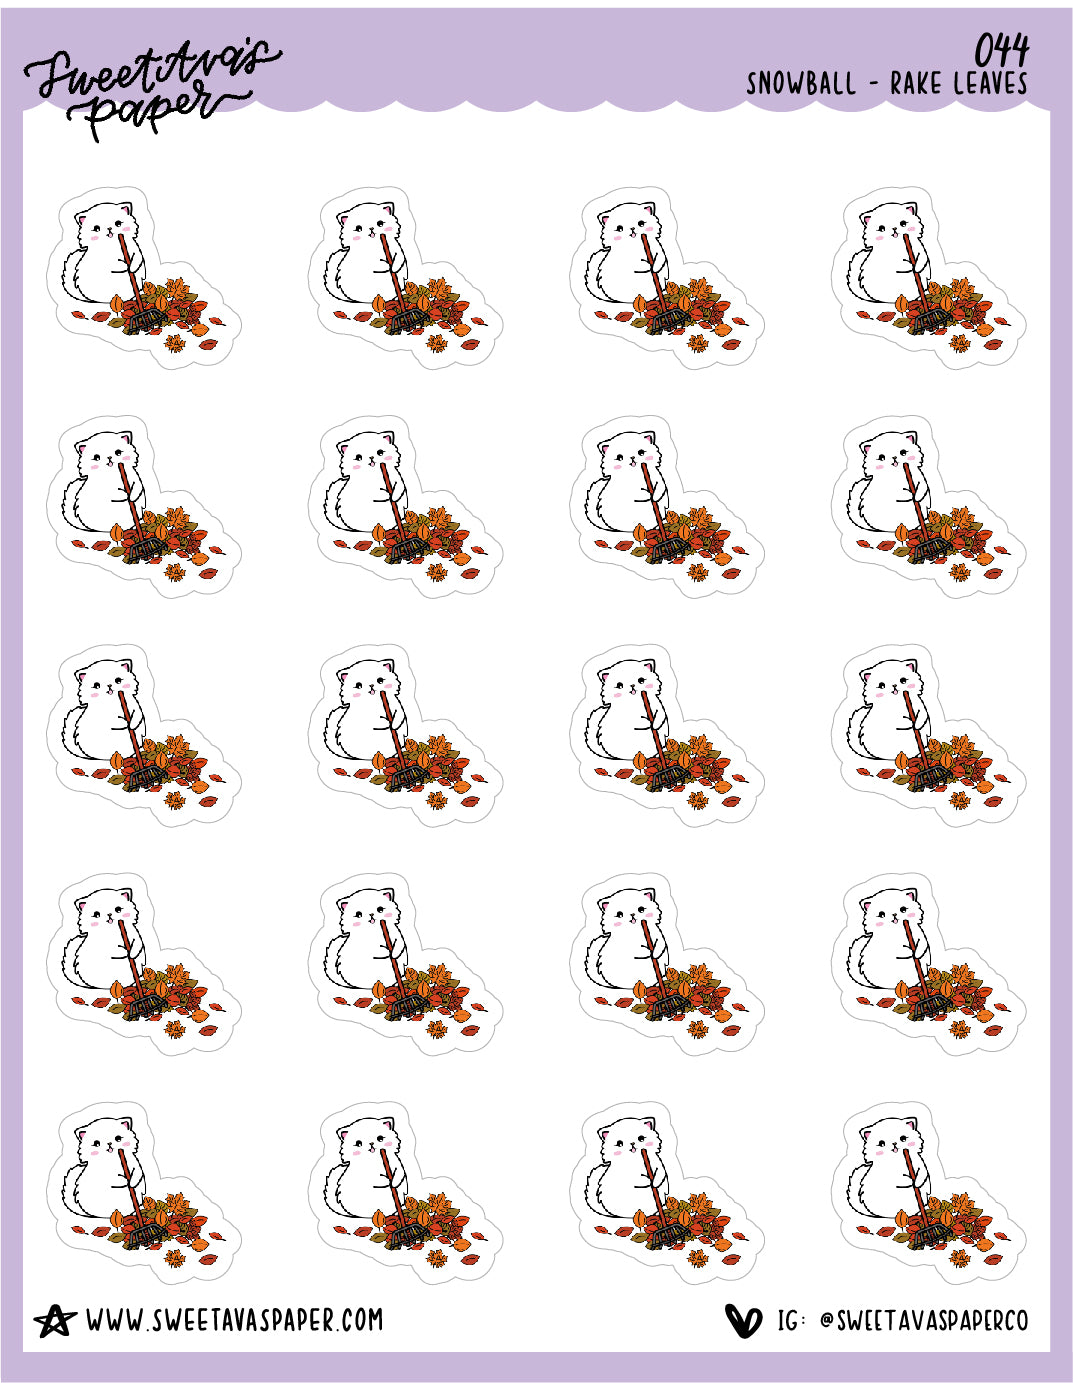 Rake The Leaves Stickers - Snowball The Cat - [044]